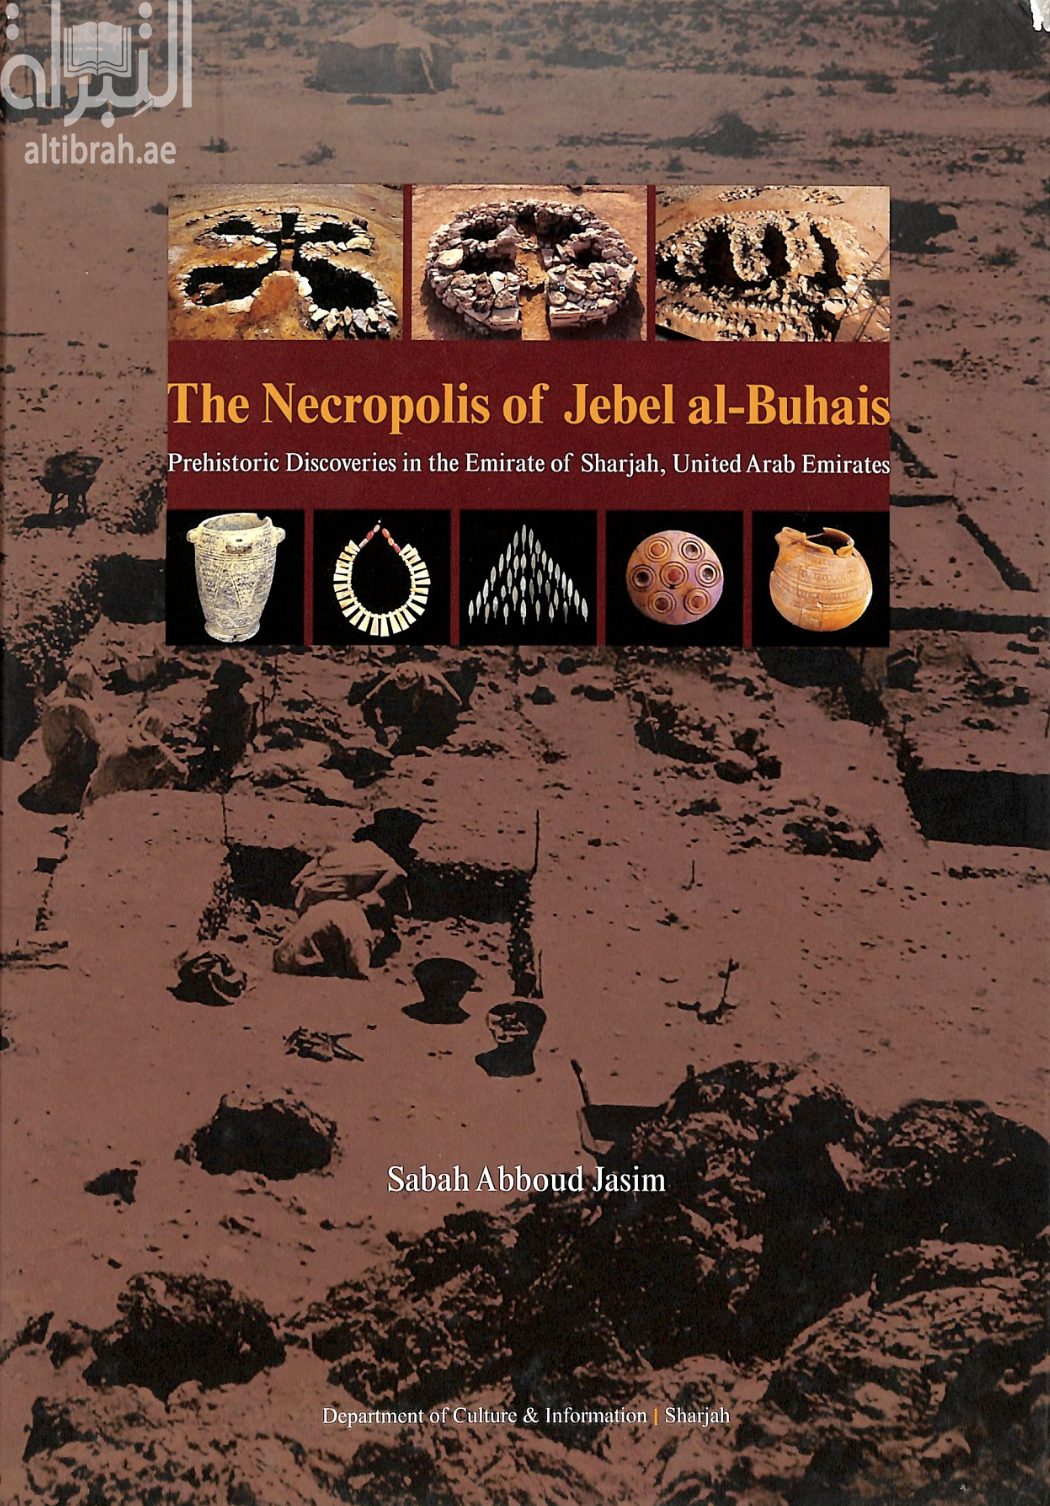 The Necropolis of Jebel al-Buhais - Prehistoric Discoveries in the Emirate of Sharjah